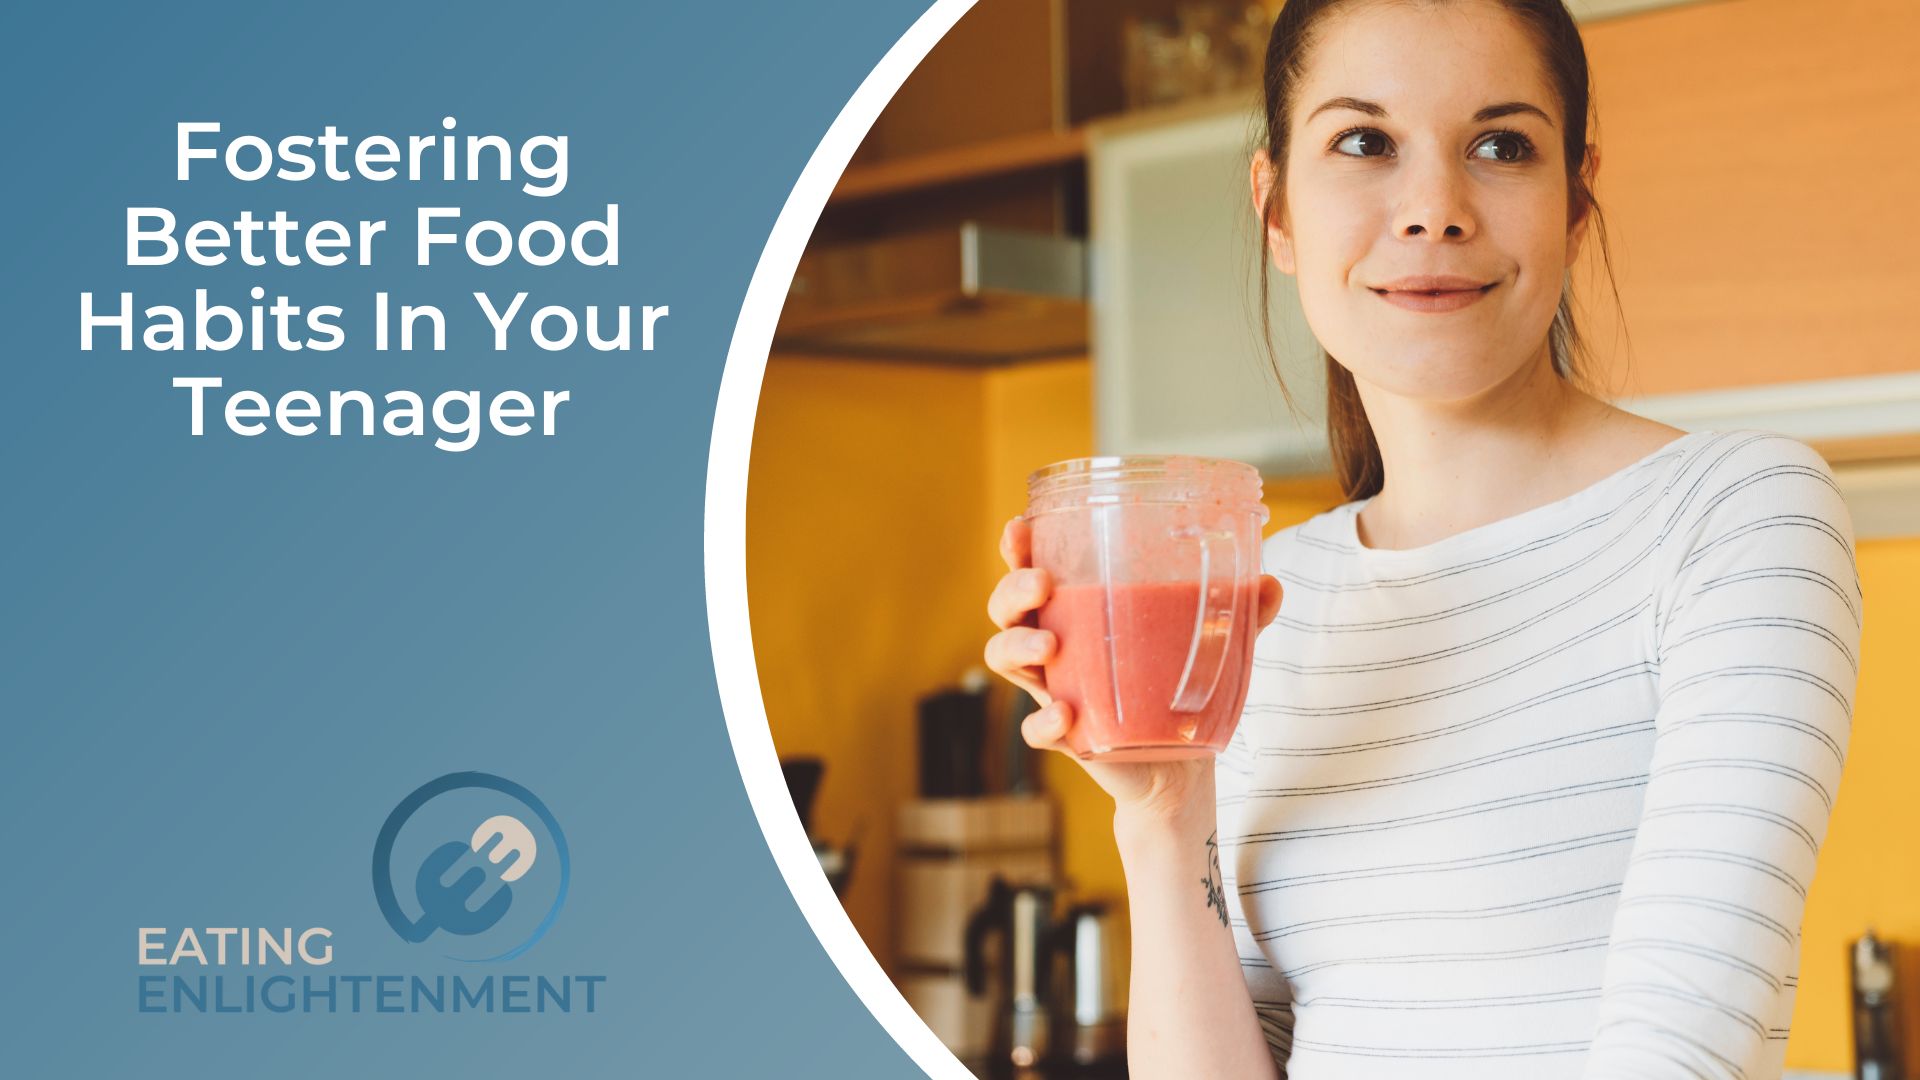 Fostering Better Food Habits In Your Teenager